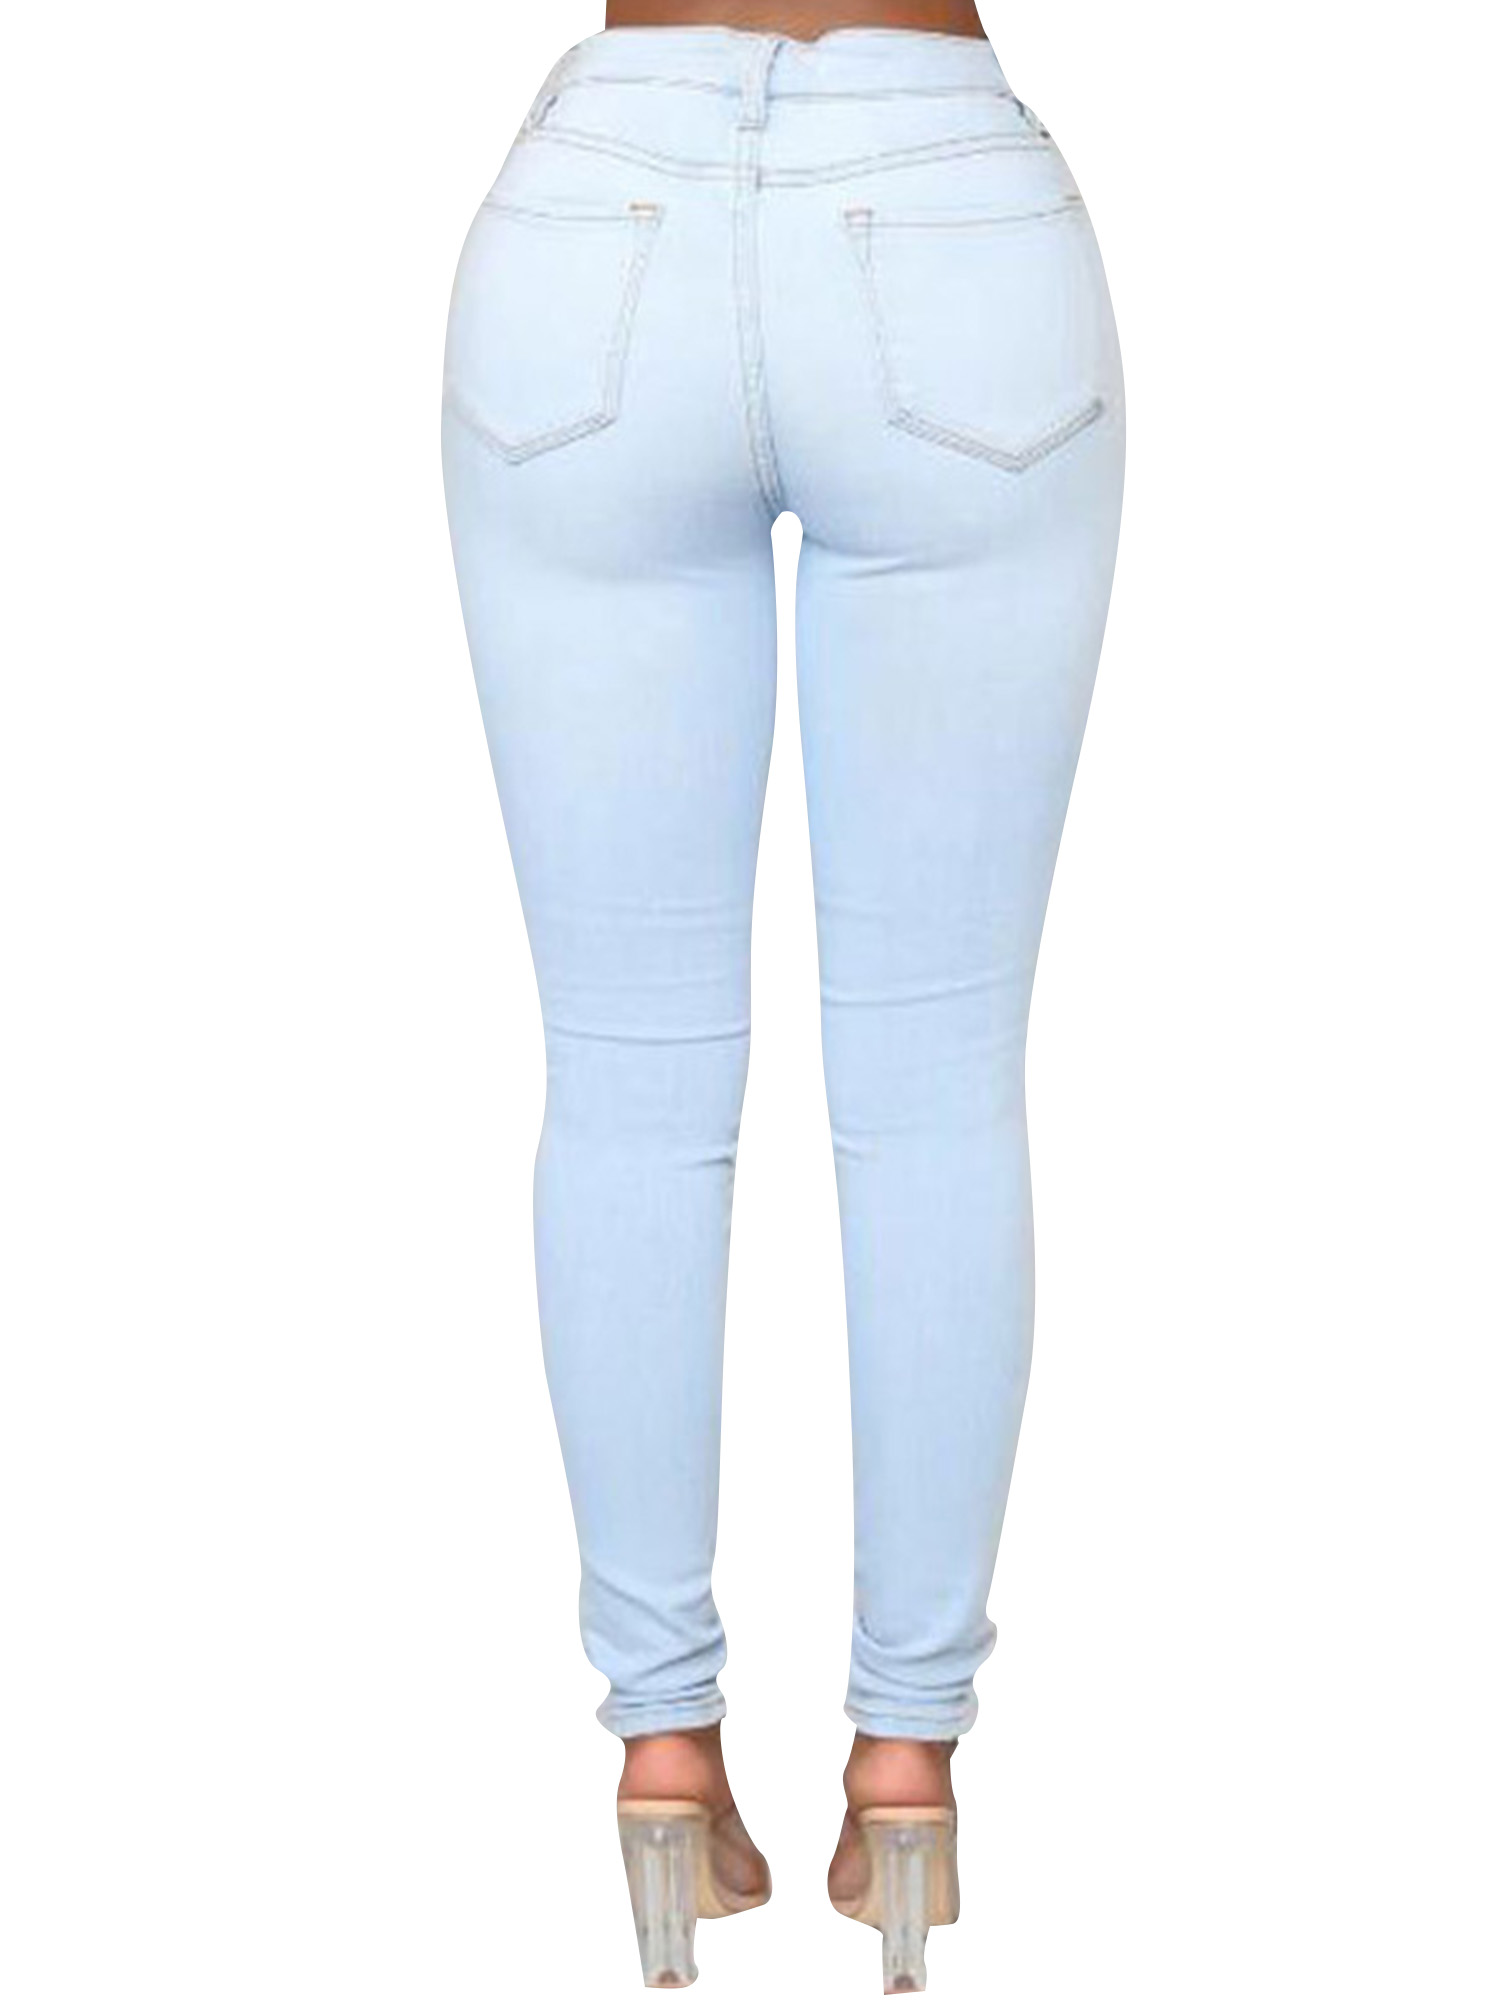 Women High Rise Distressed Solid Stretch Sexy Skinny Leg Denim Jeans Bodycon Jeggings Pencil Pants Trousers With Pockets - image 5 of 5